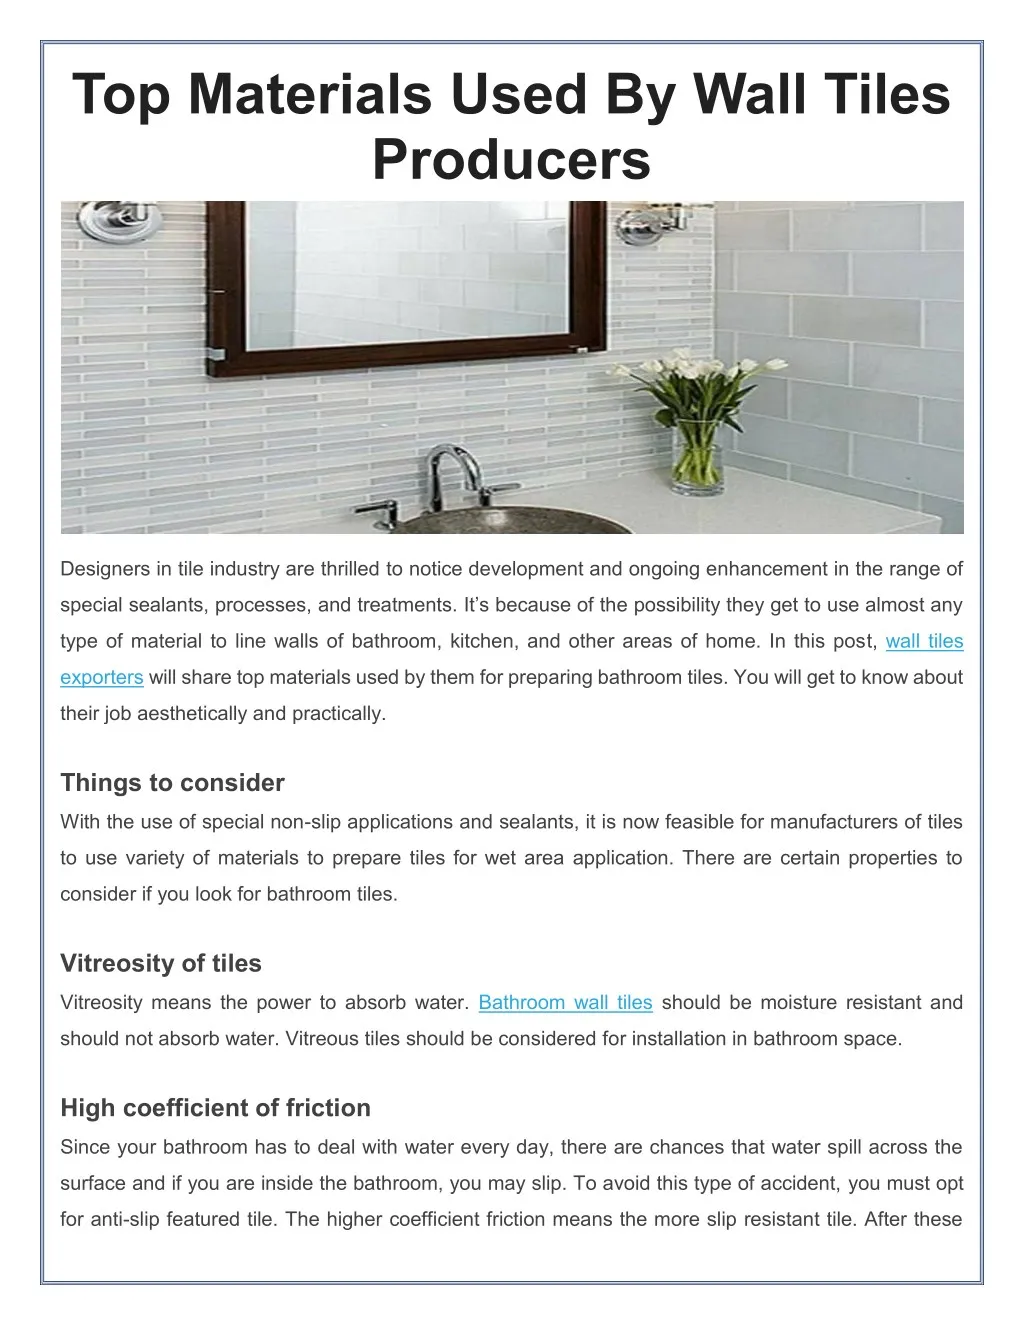 top materials used by wall tiles producers